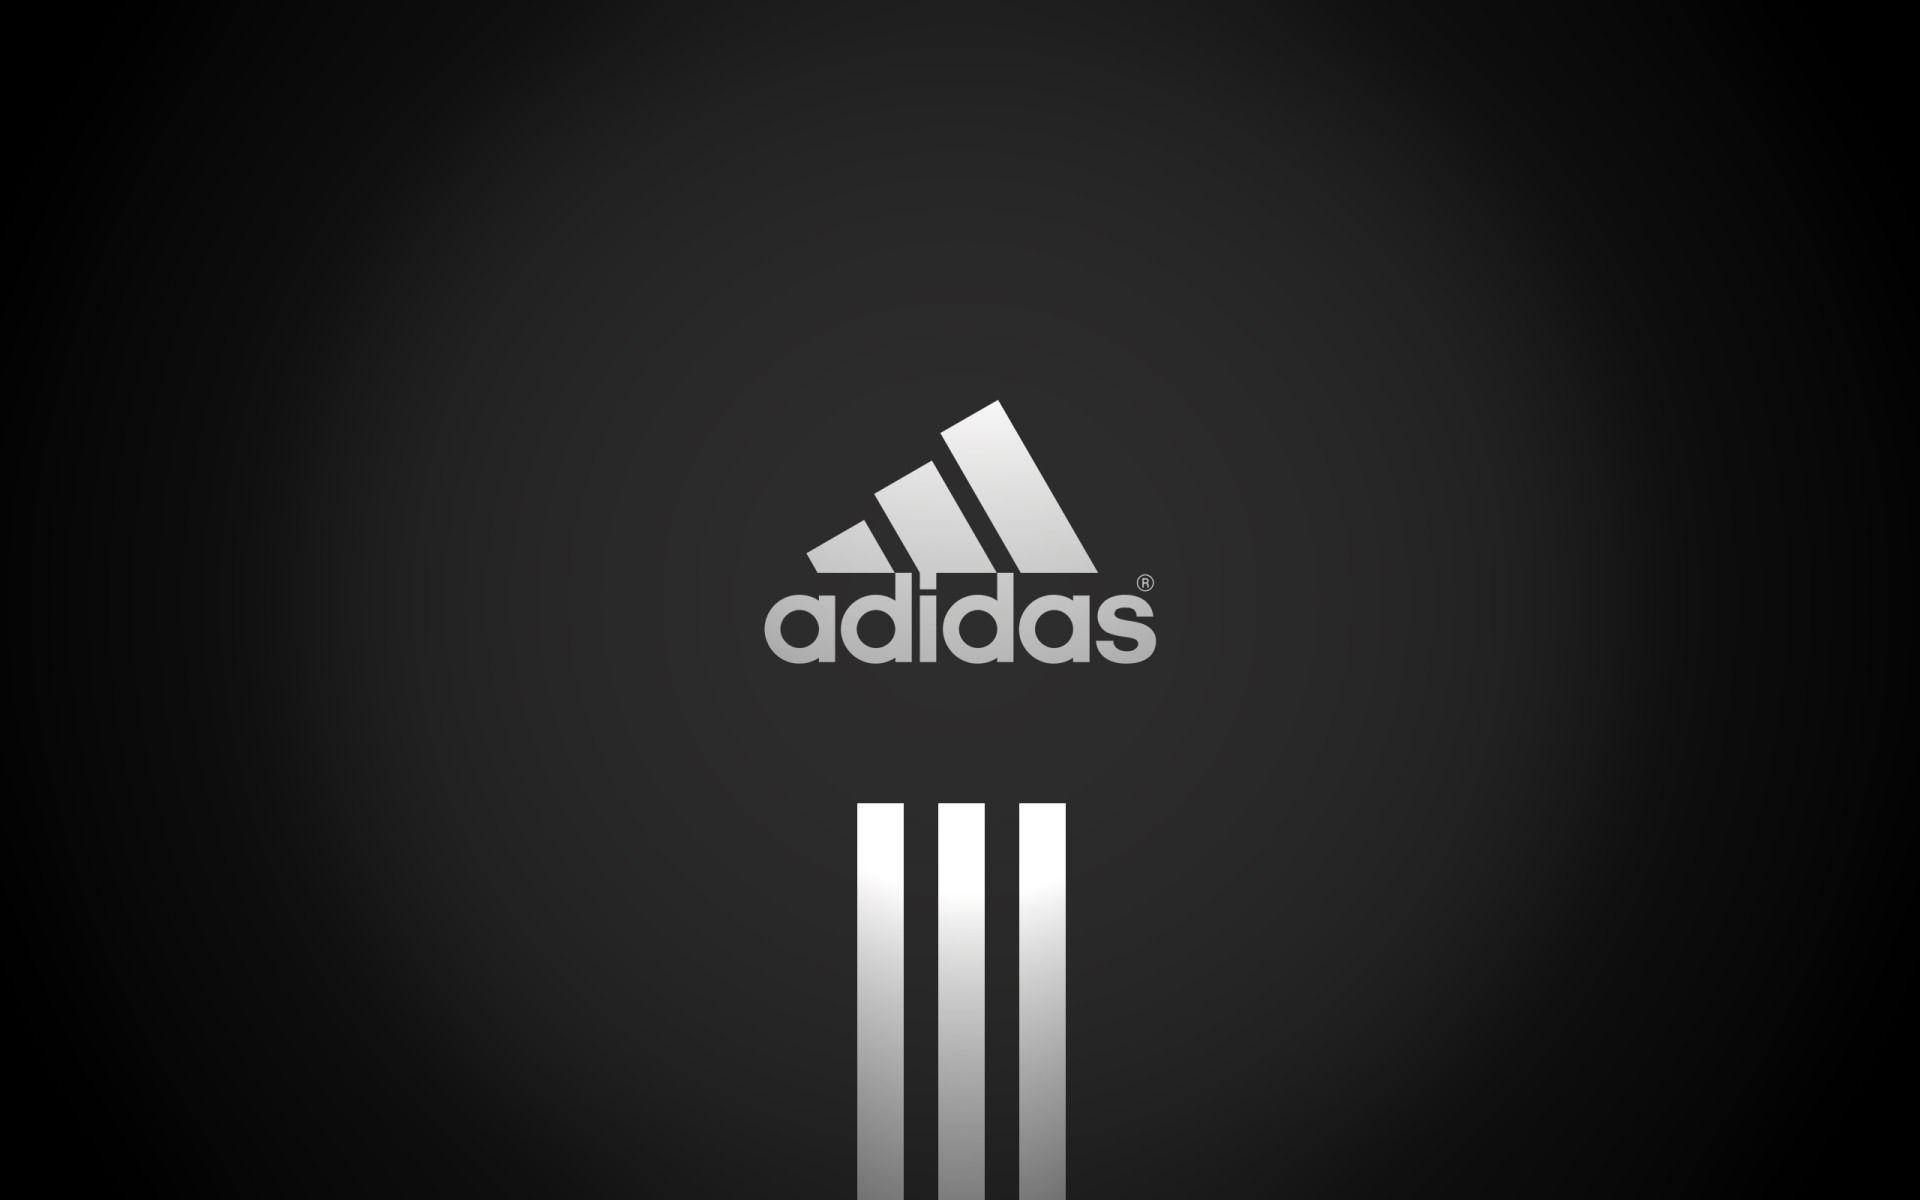 Adidas Marble Wallpaper, image collections of wallpaper